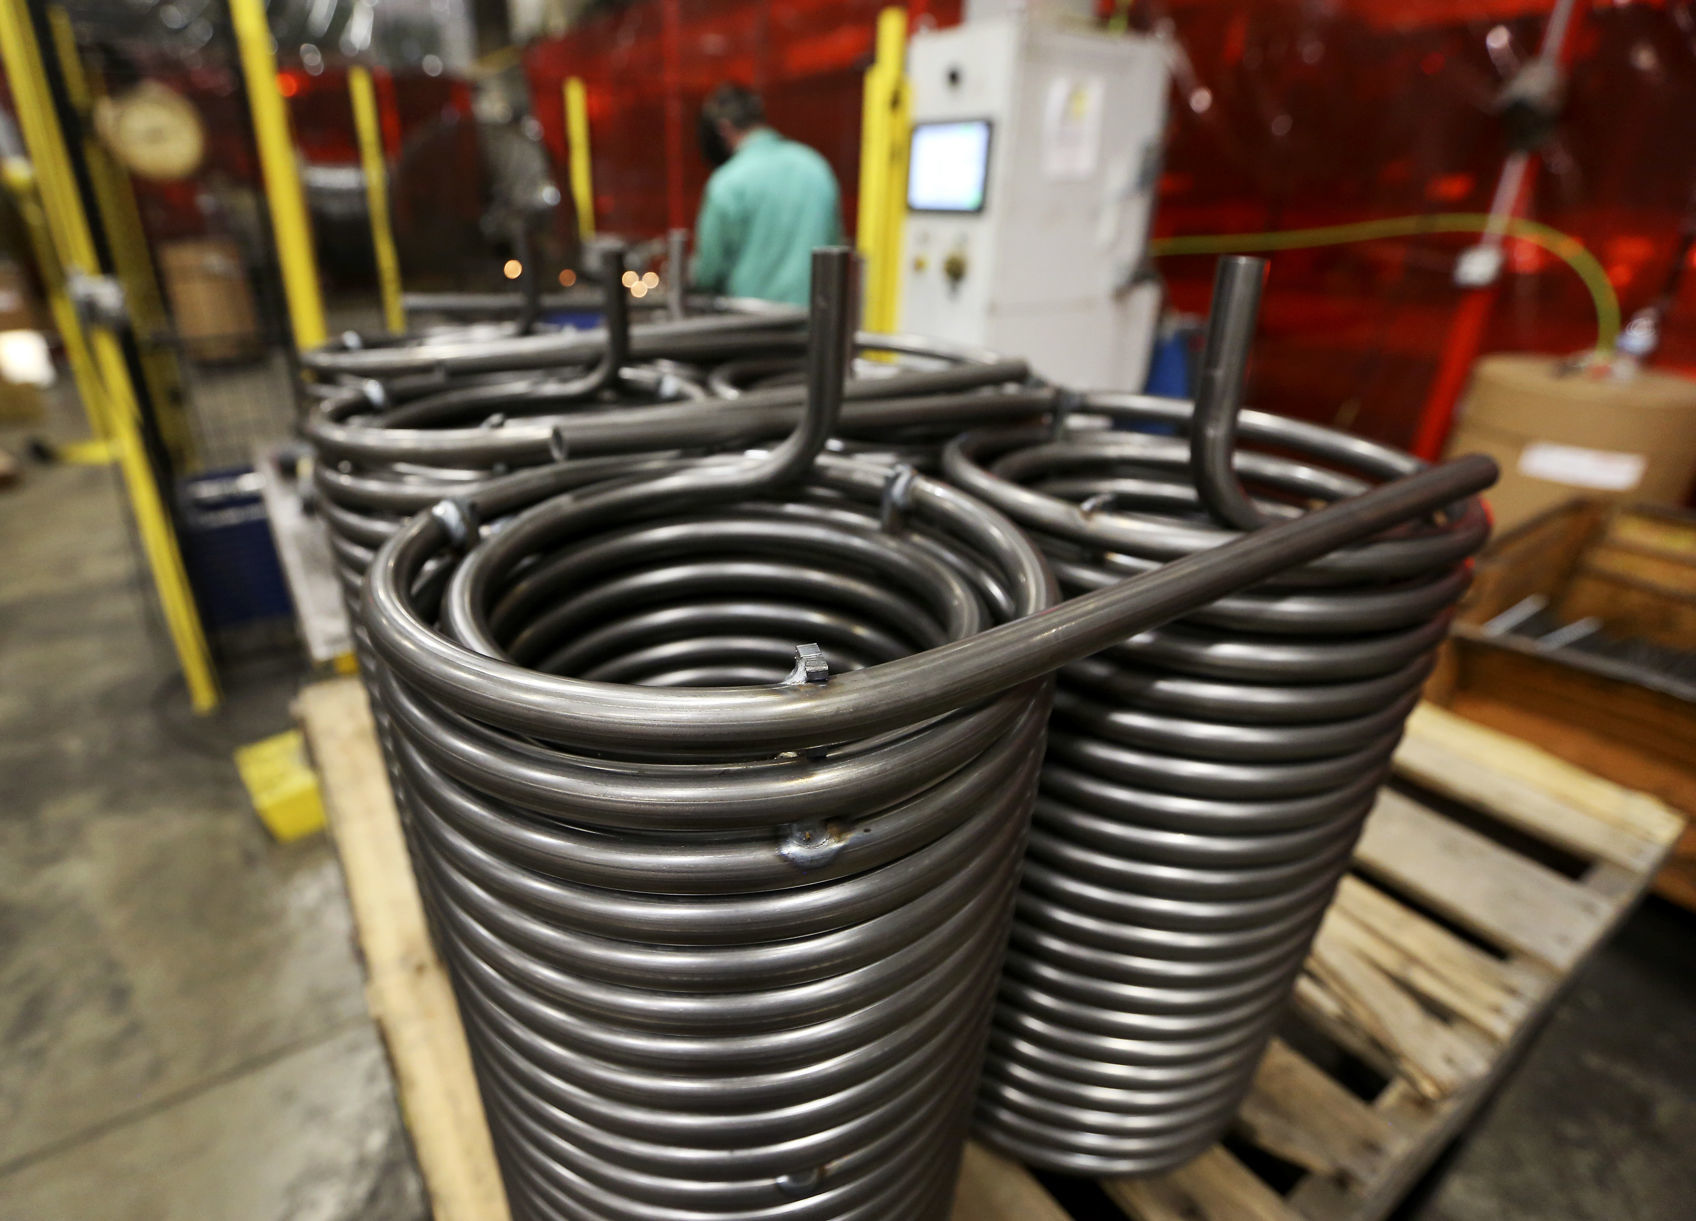 Hot water coils are fabricated at Mi-T-M Corporation in Peosta, Iowa, on Monday, June 24, 2019.    PHOTO CREDIT: NICKI KOHL